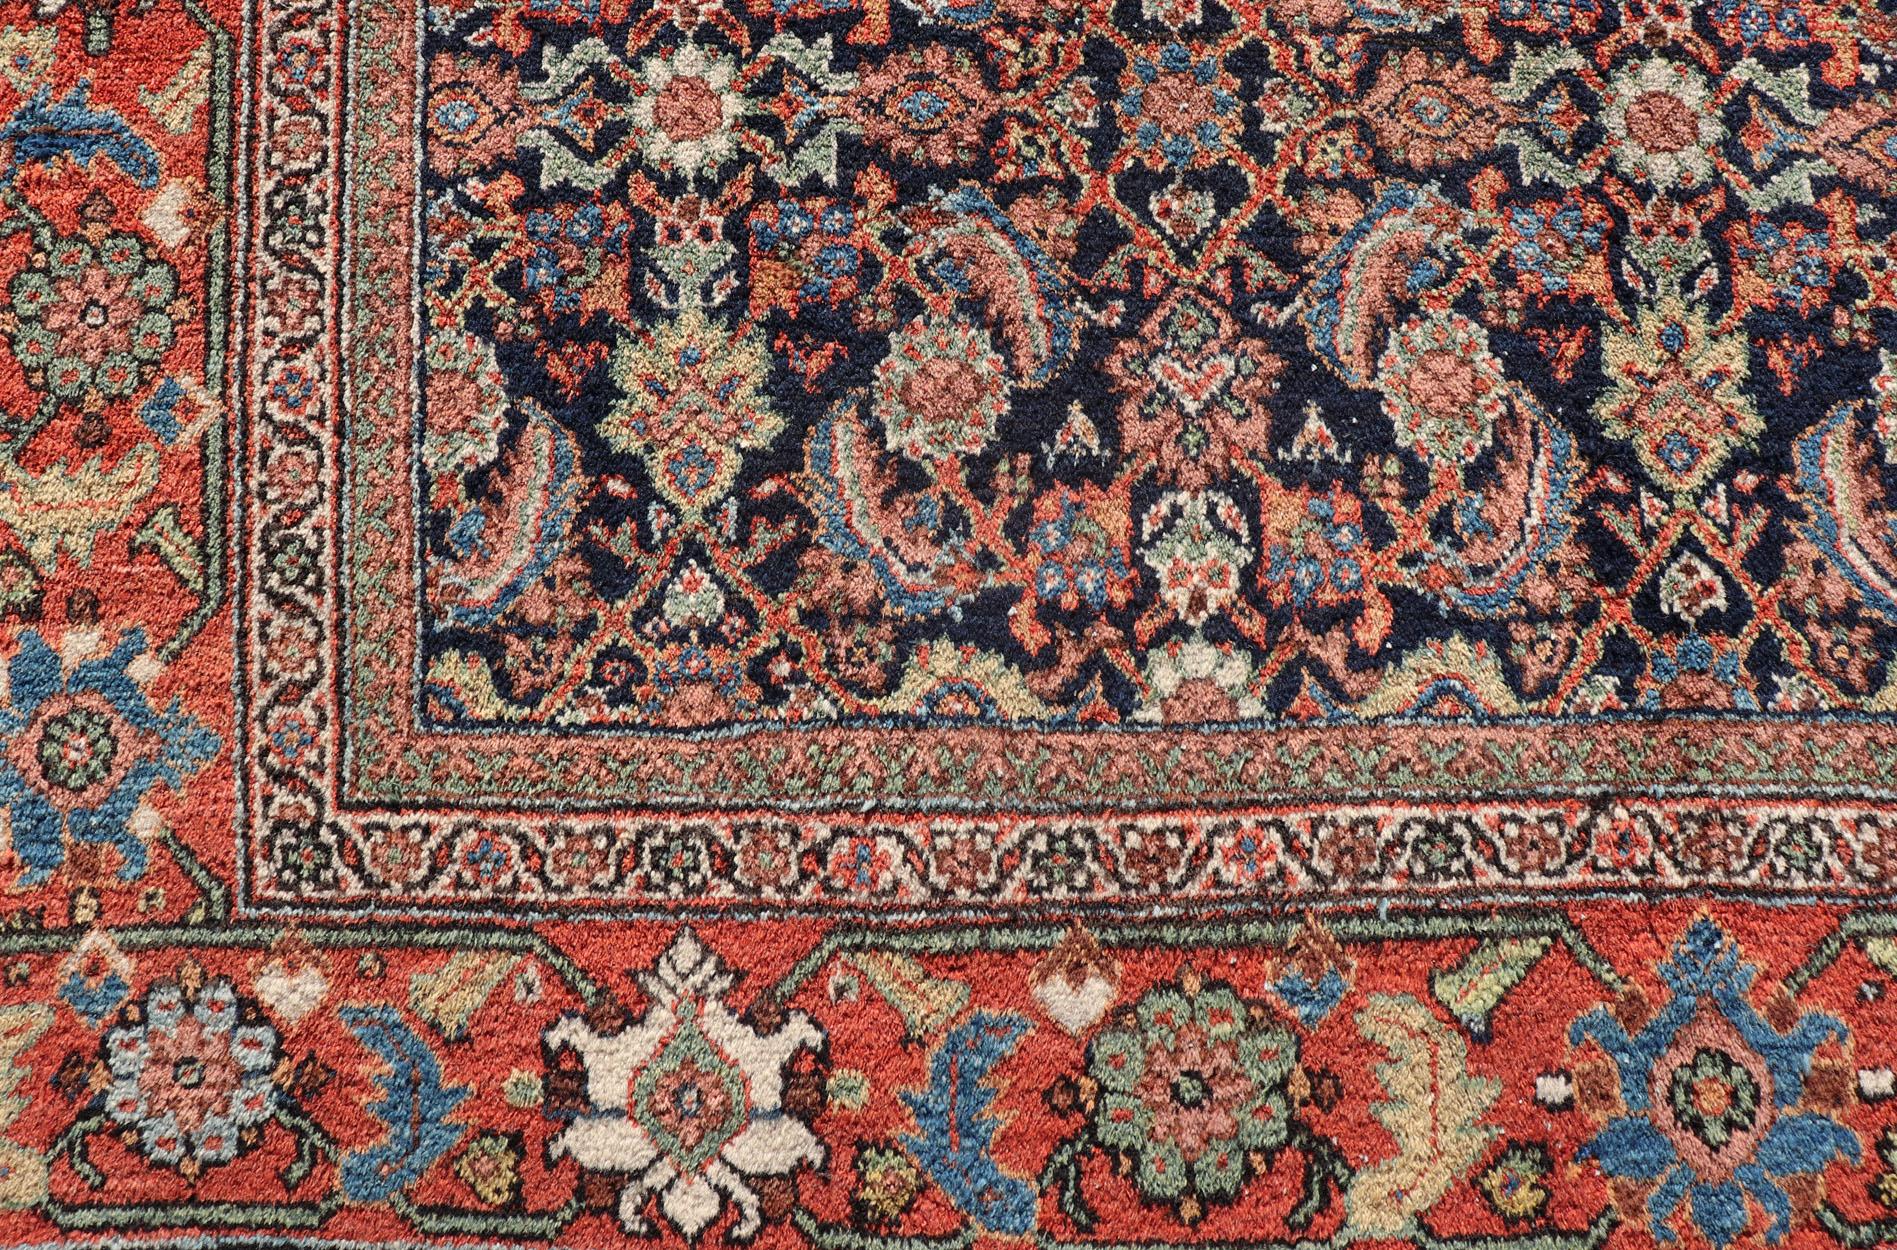 Wool Antique Persian Sultanabad/Mahal Rug in Blue Background & Rust/Red Border